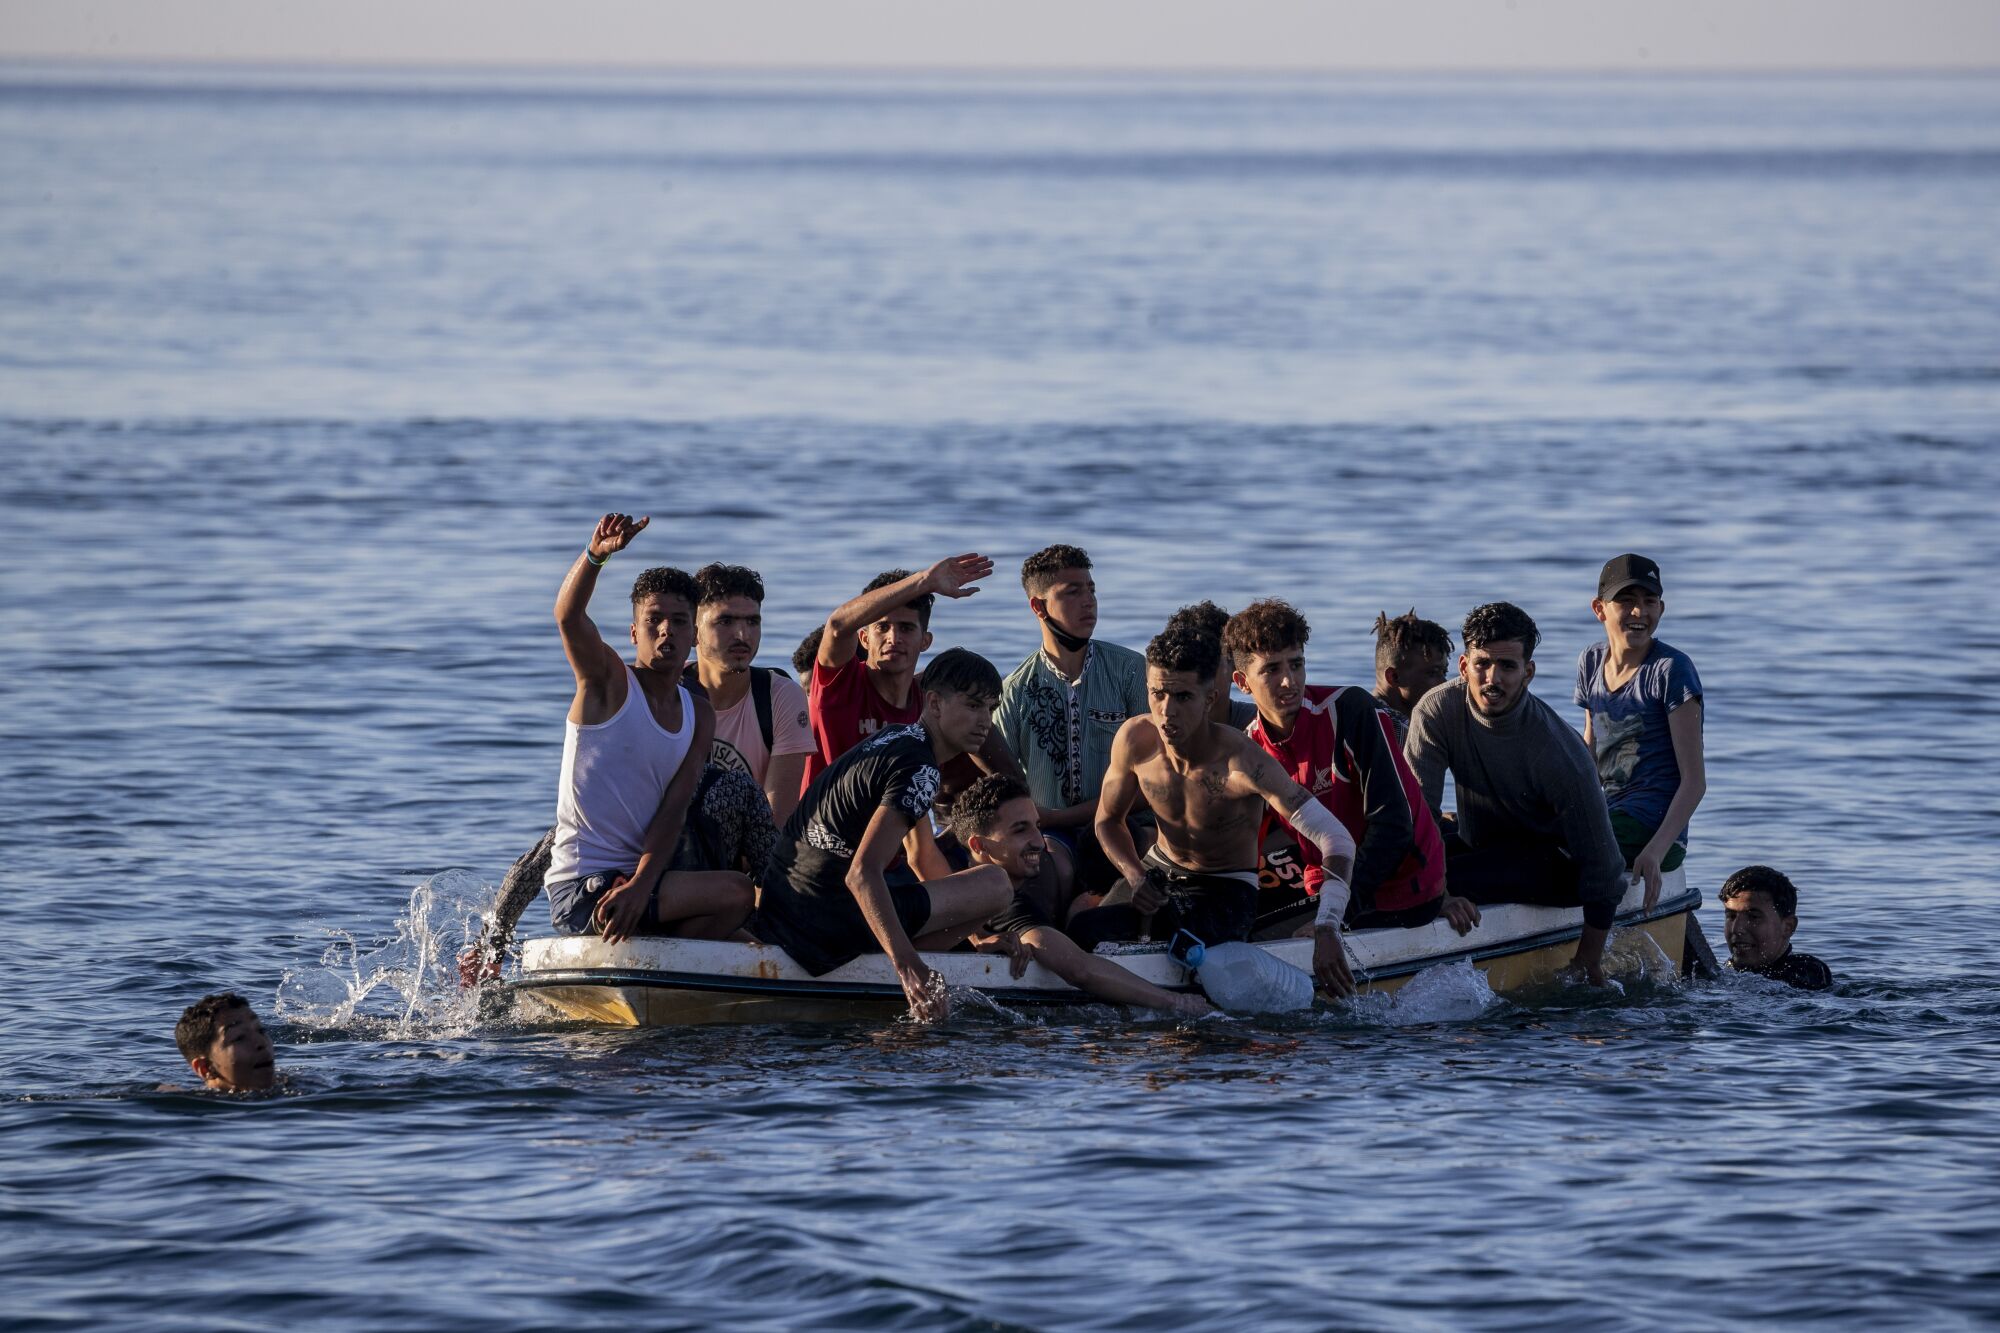 A small boat overloaded with more than a dozen young men and boys